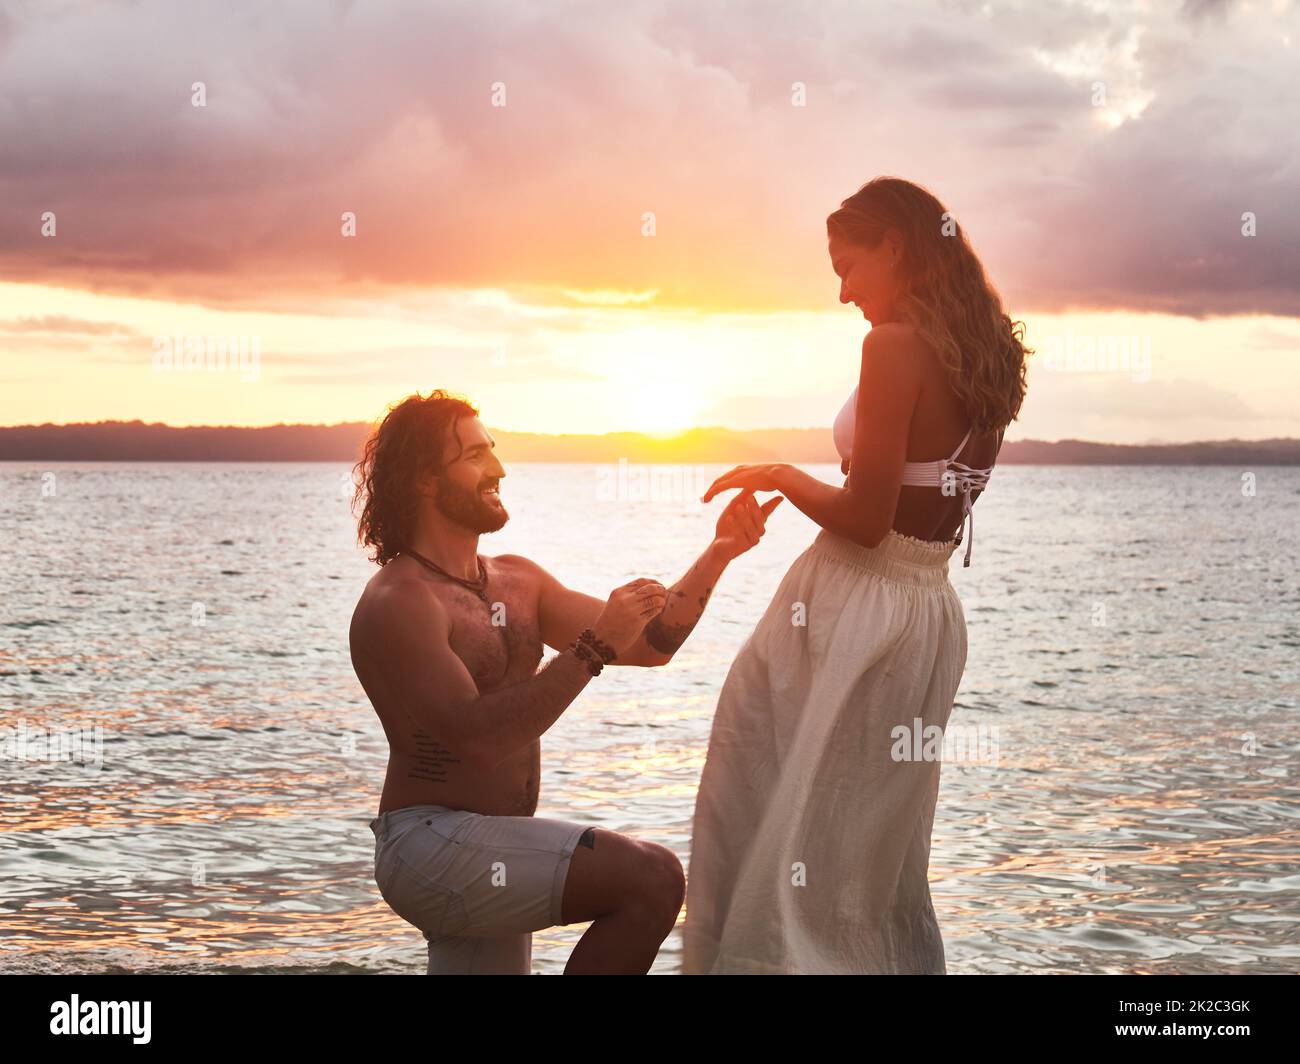 He popped the question at the most scenic place. Shot of a young man proposing to his girlfriend at the beach. Stock Photo